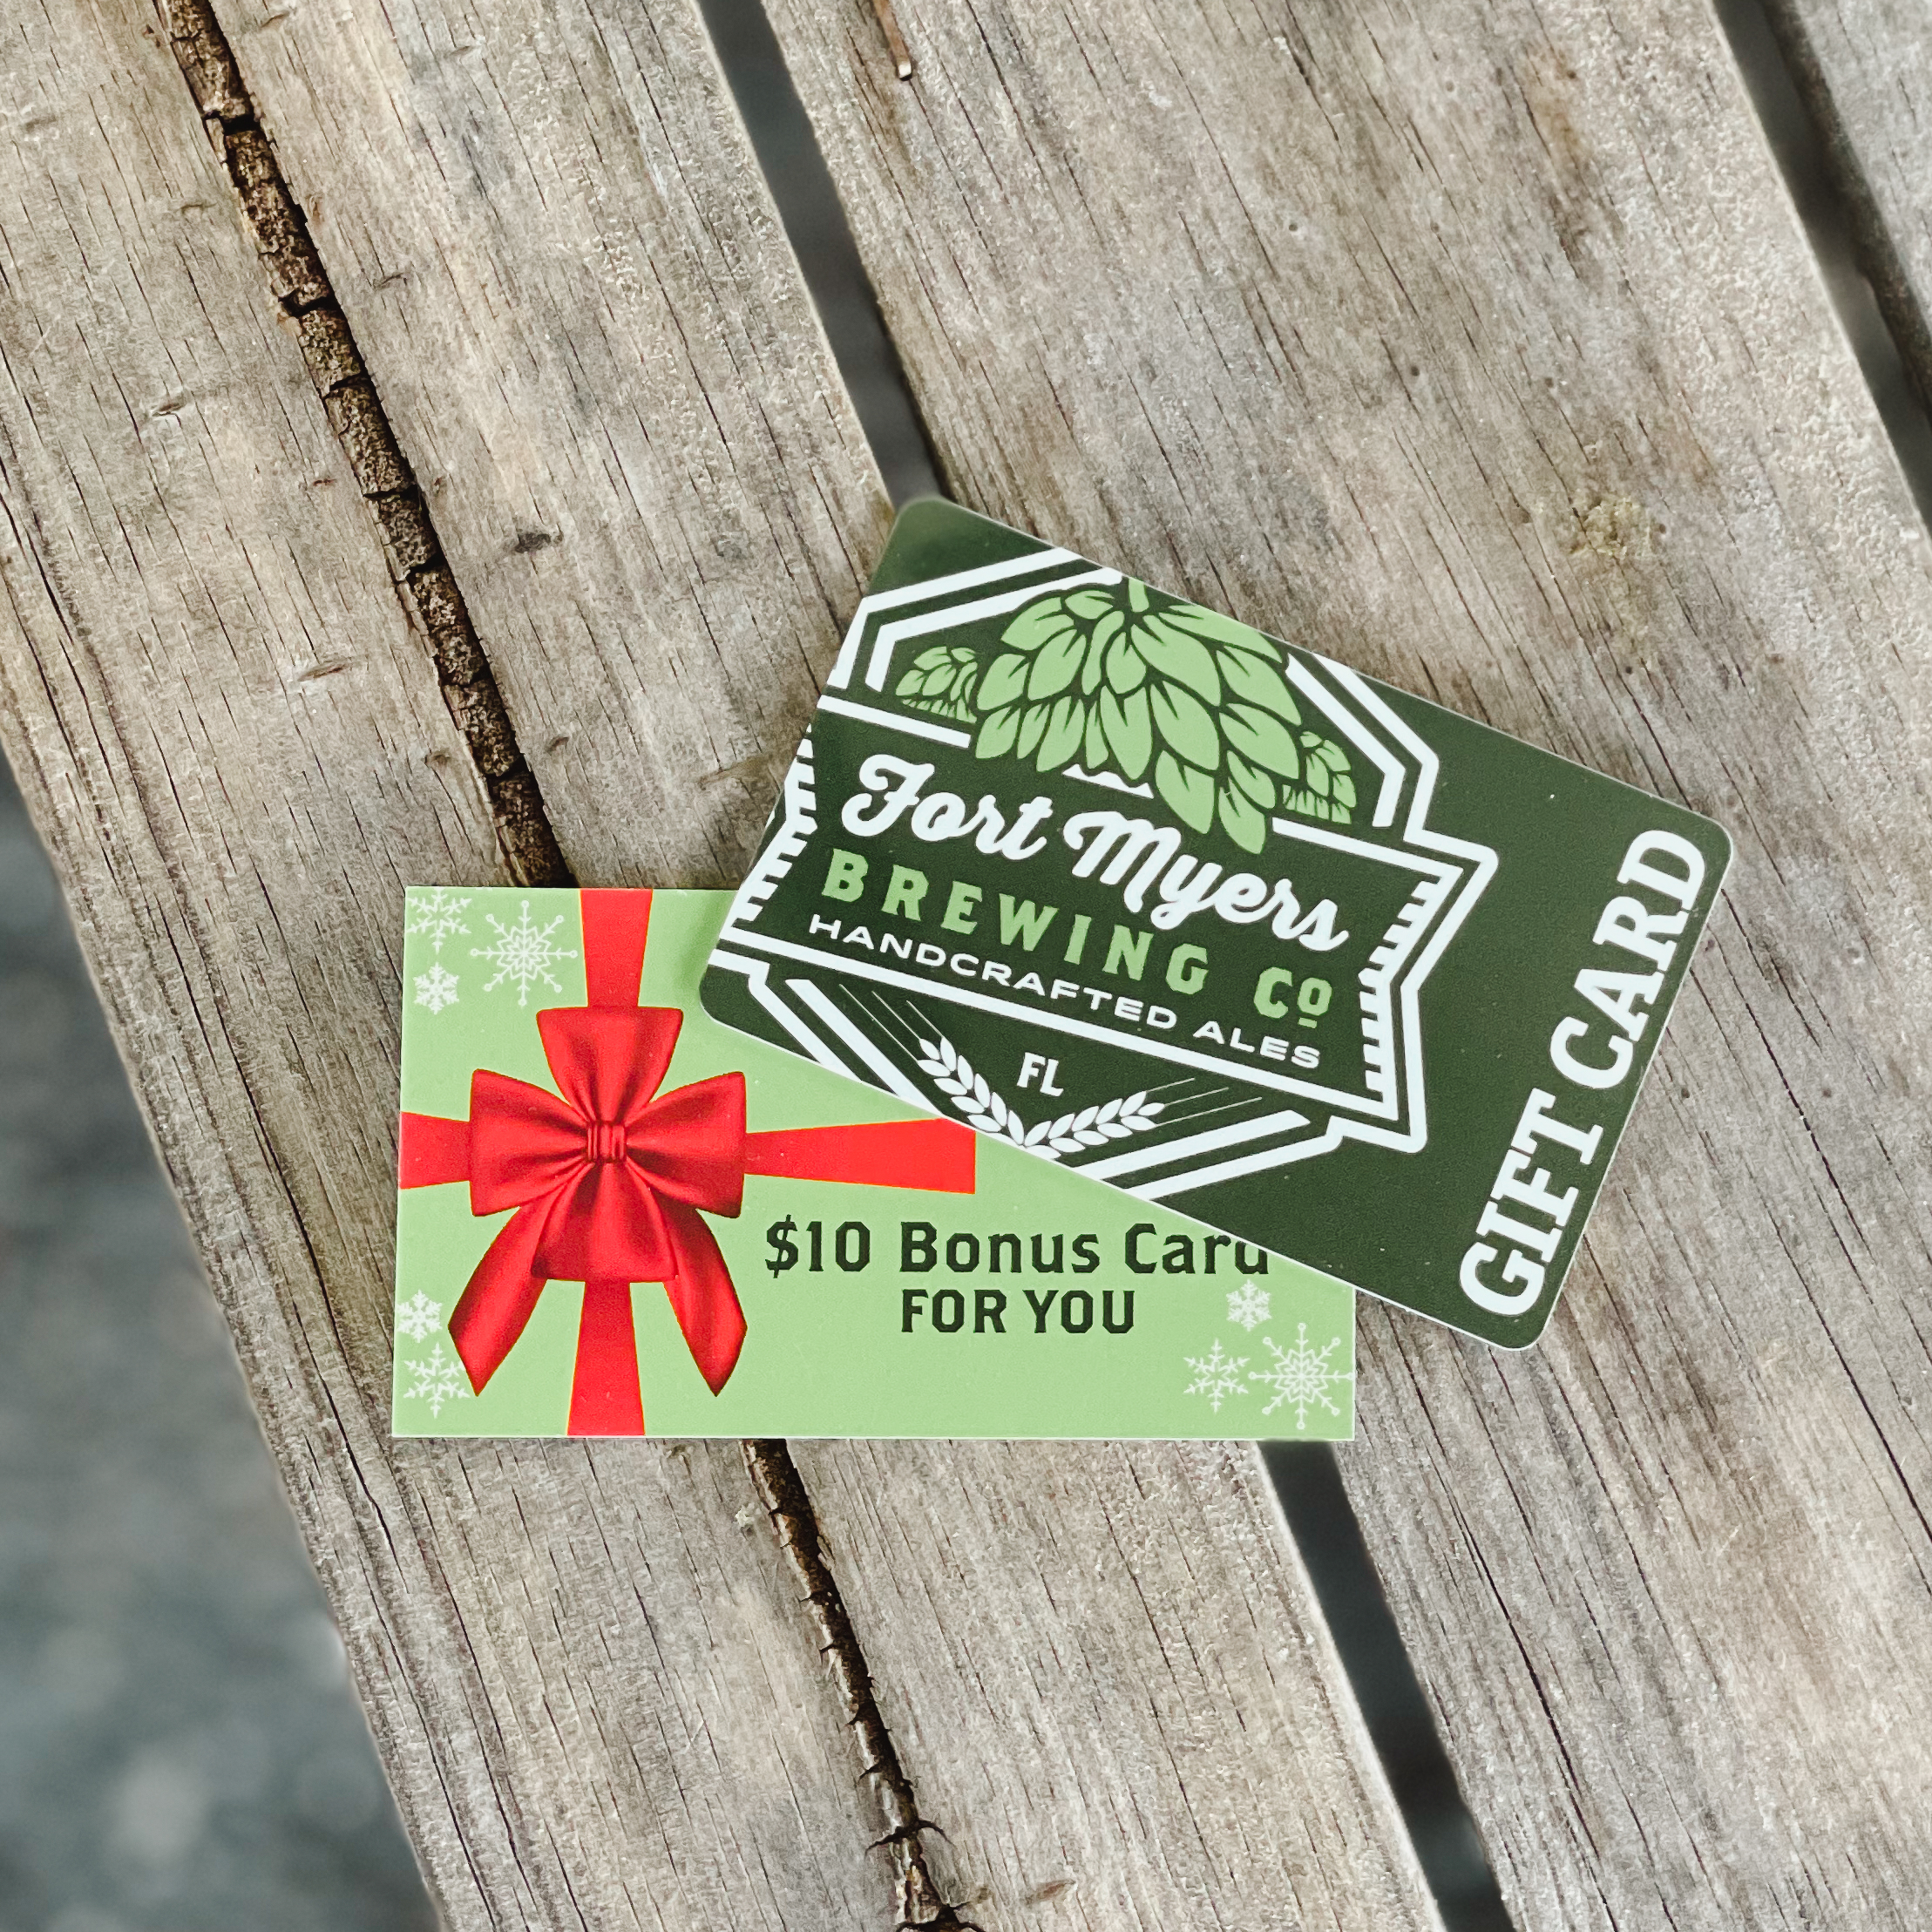 A Fort Myers Brewing gift card with a bow on it sitting on a wooden table.